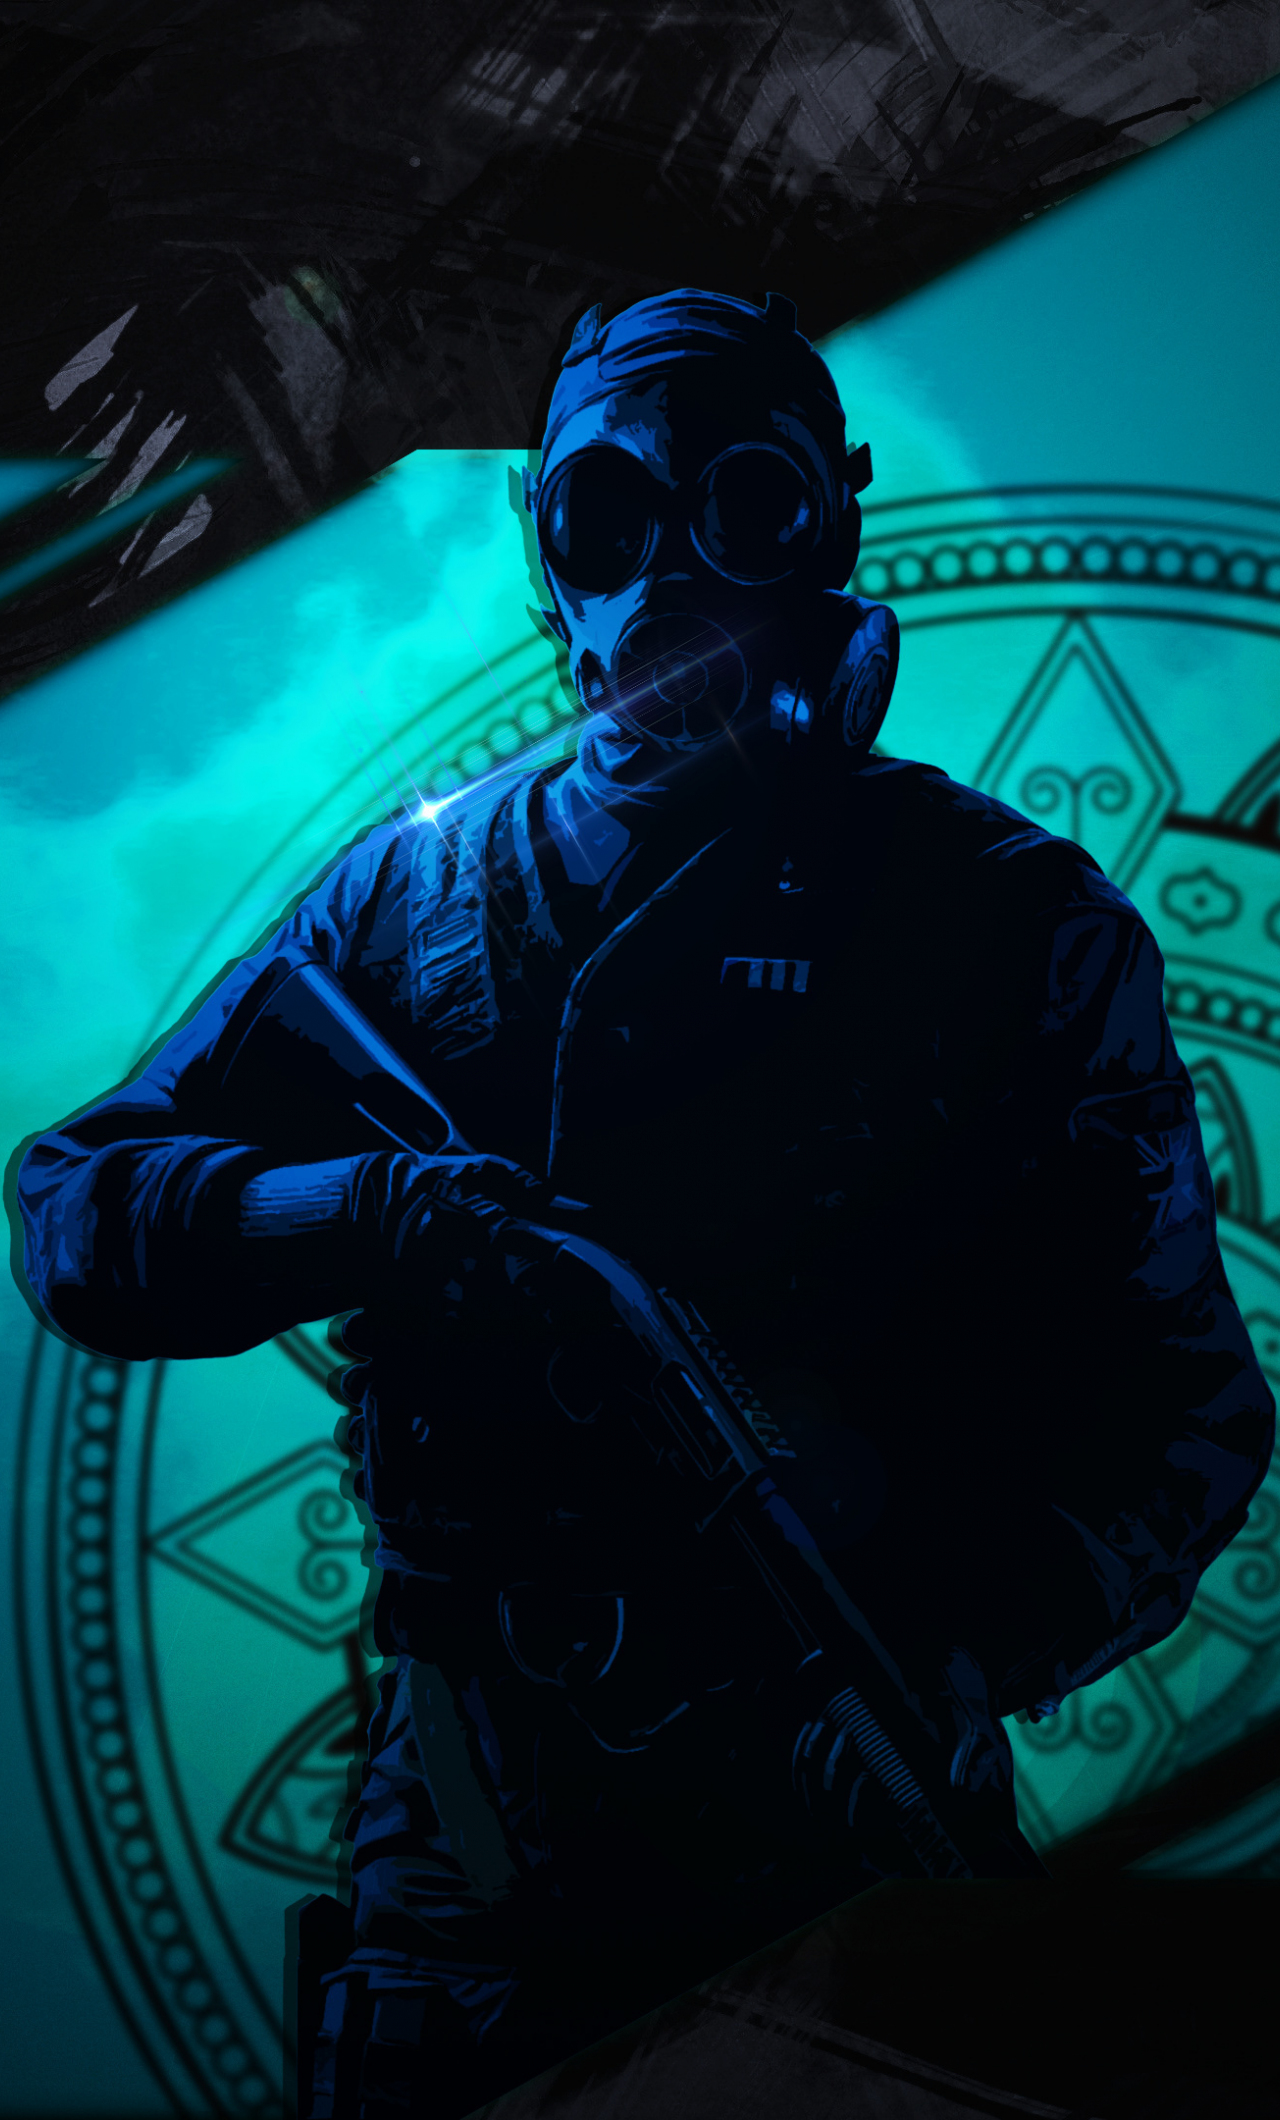 Download 1280x21 Wallpaper Thatcher Tom Clancy S Rainbow Six Siege Game Silhouette Iphone 6 Plus 1280x21 Hd Image Background